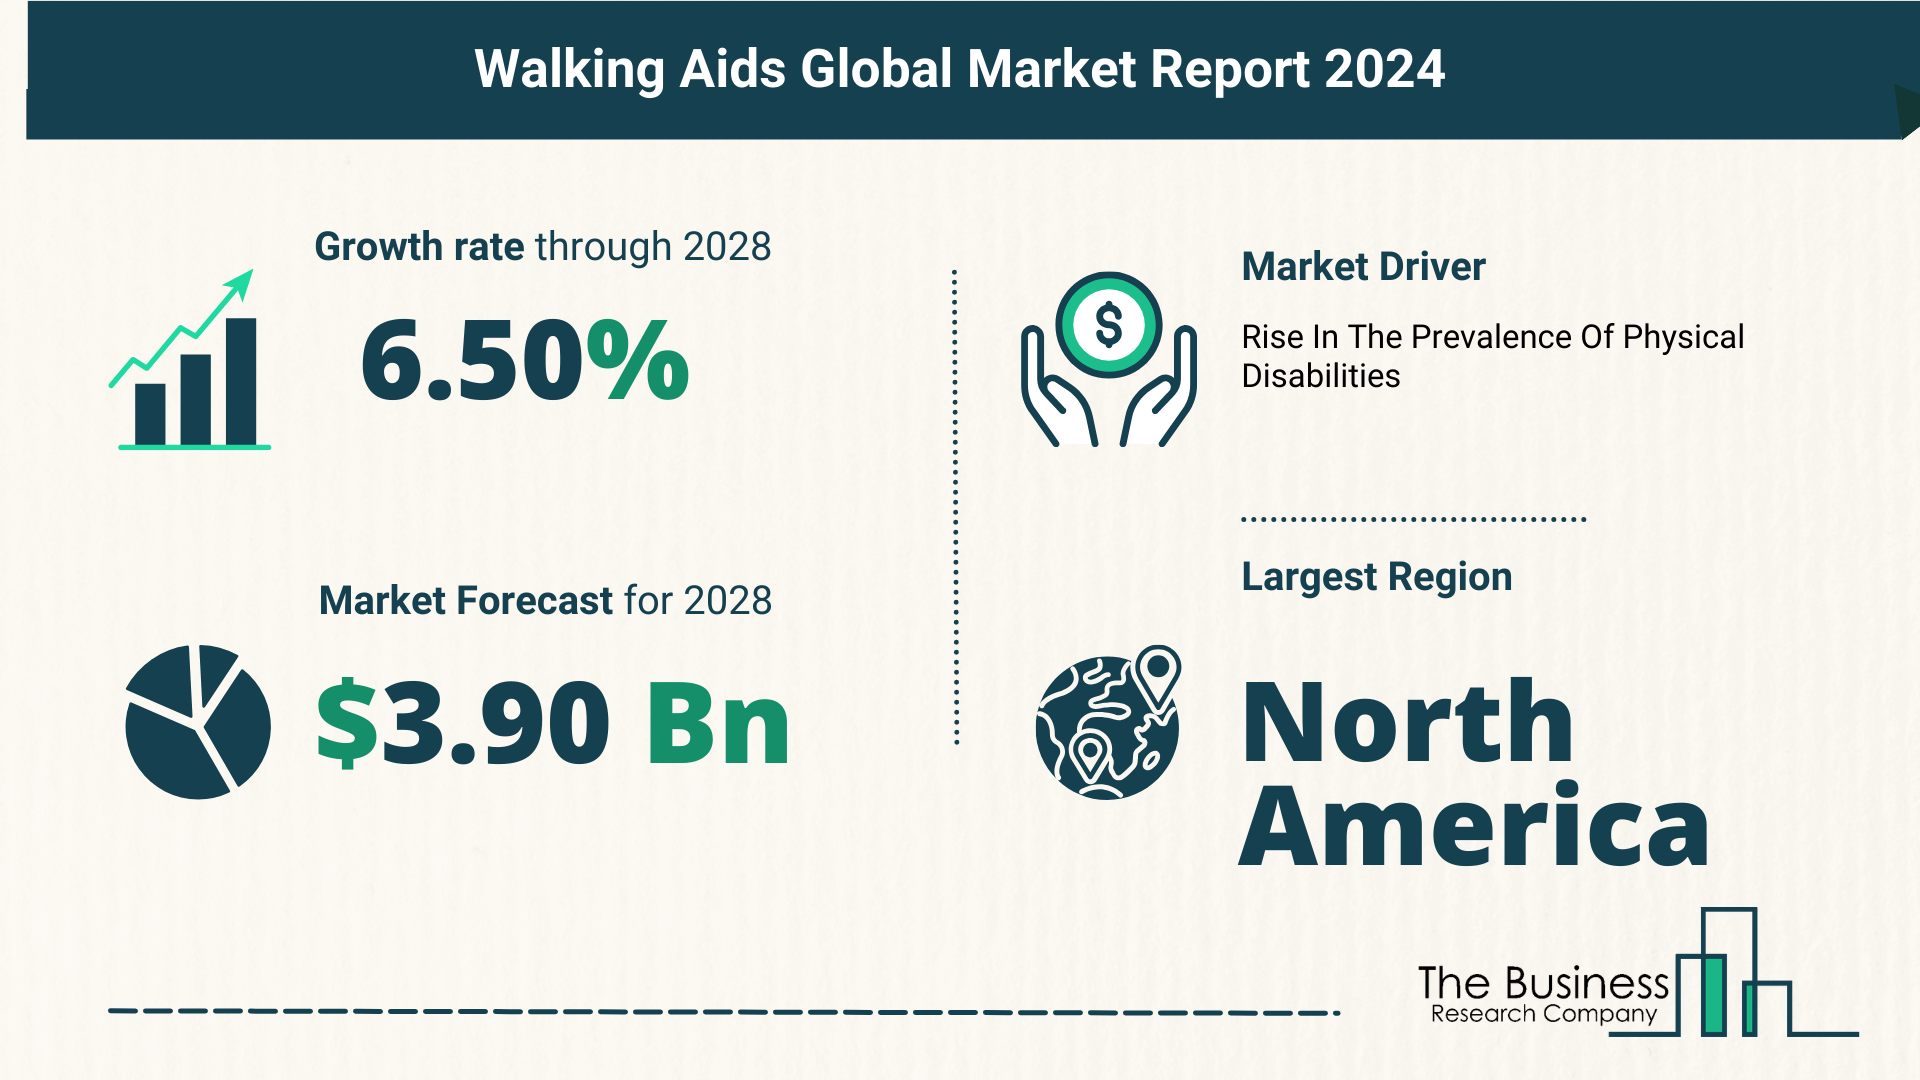 Global Walking Aids Market Overview 2024: Size, Drivers, And Trends